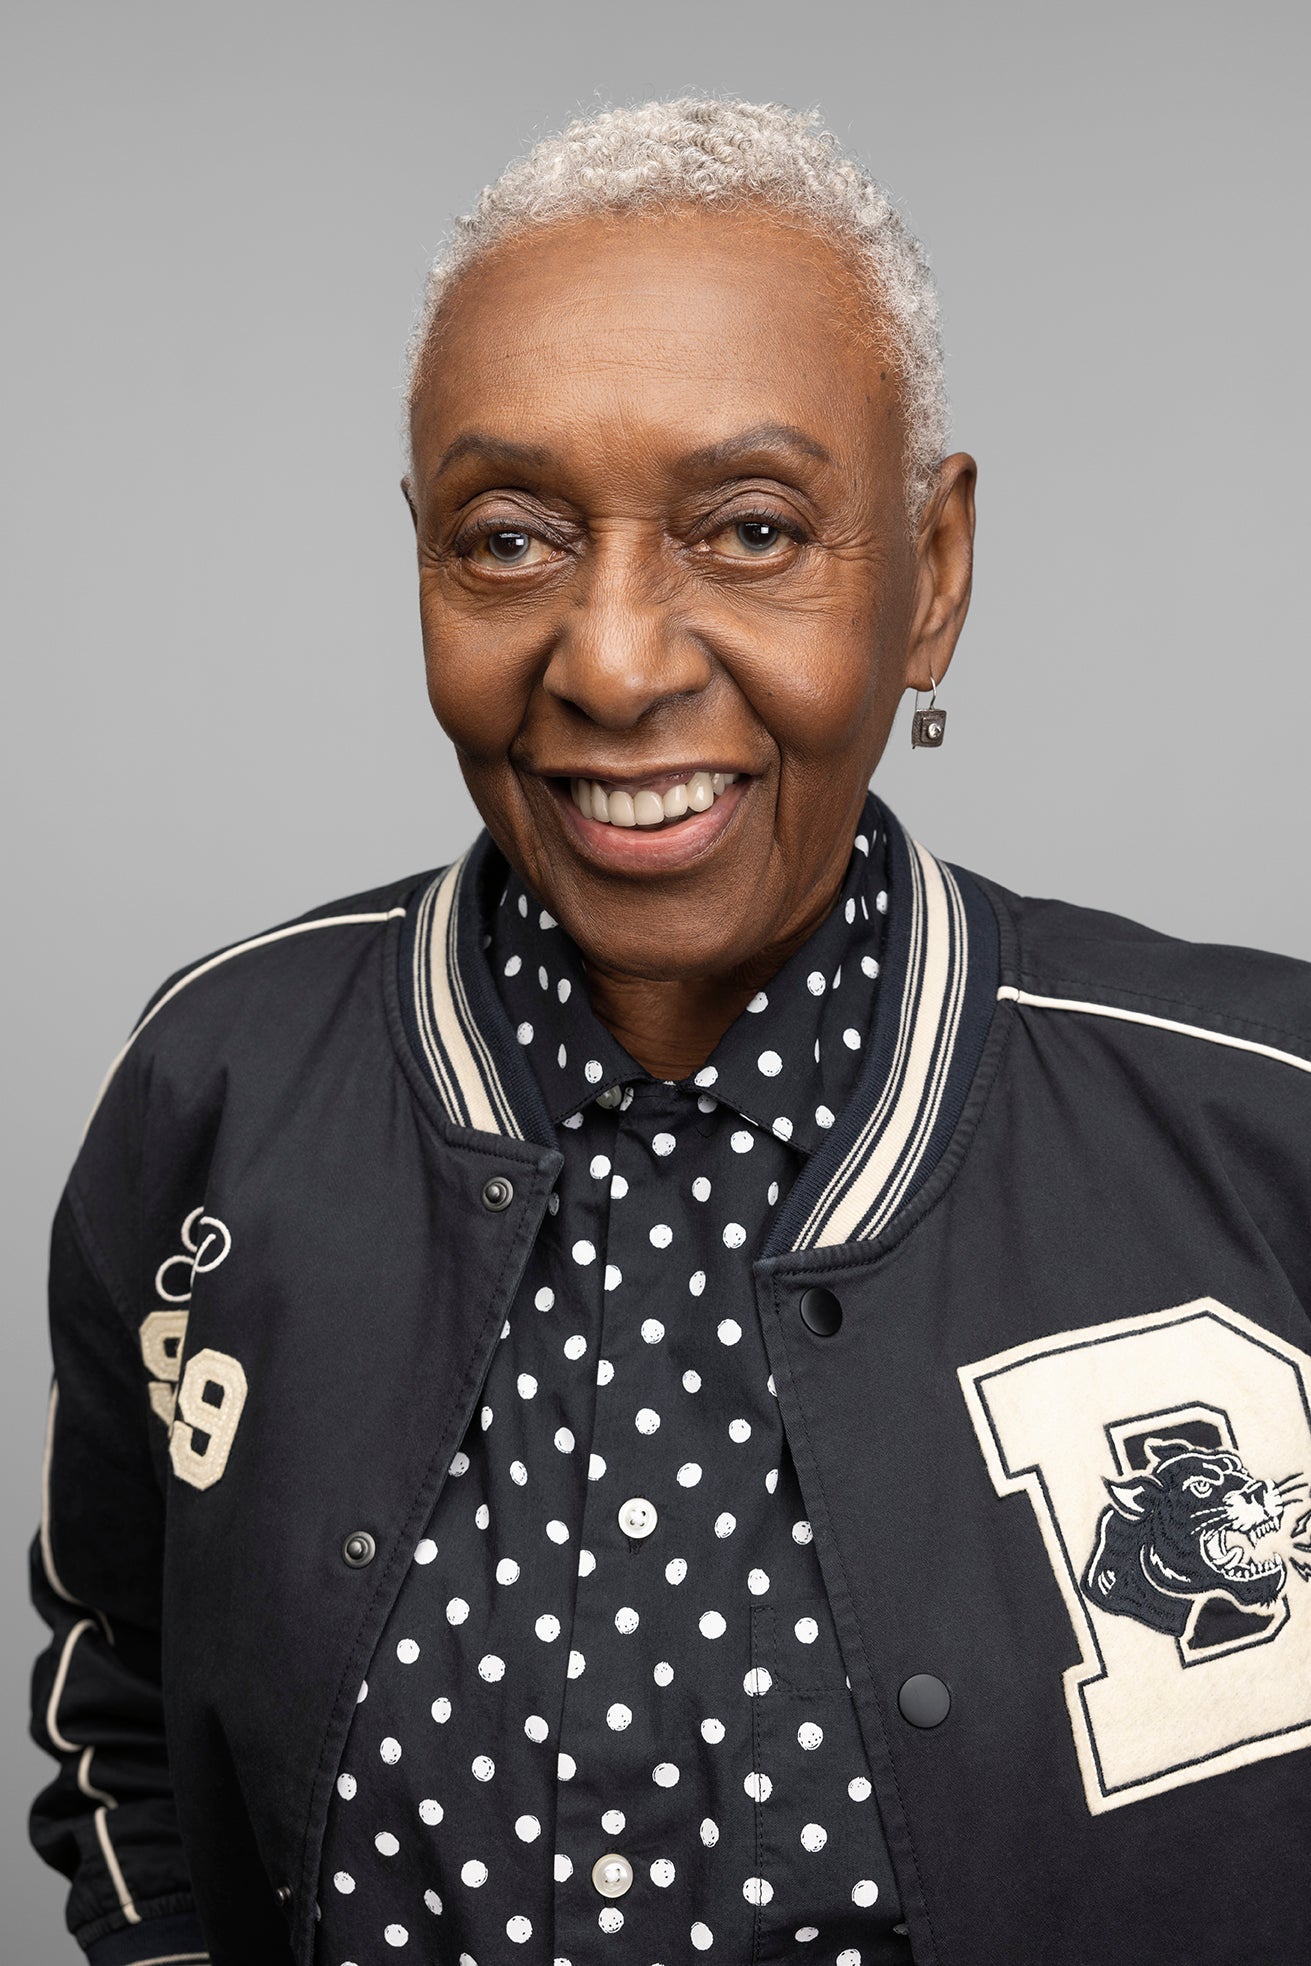 Bethann Hardison on The Brooklyn Circus X Gap, The Trajectory Of Fashion, And Her Advice For Fashion’s Brightest Talents